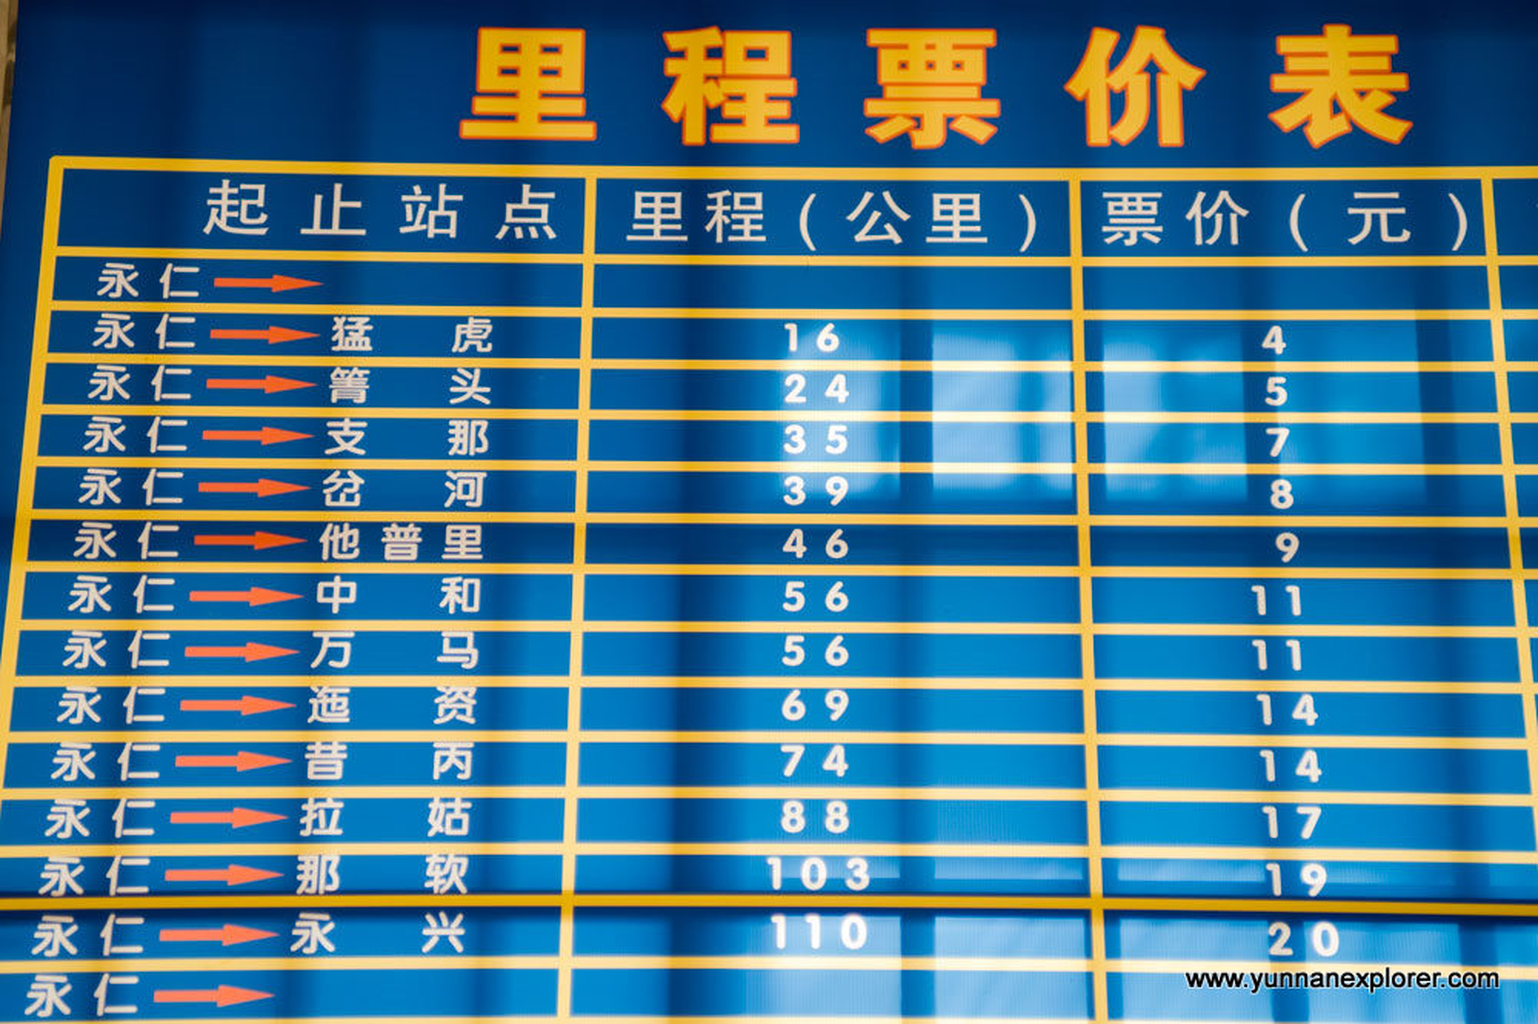 Picture: Frequent transport to Kunming, Yuanmou, Chuxiong and Panzhihua. Local transport is not as frequent as the posted time-tables indicate. 